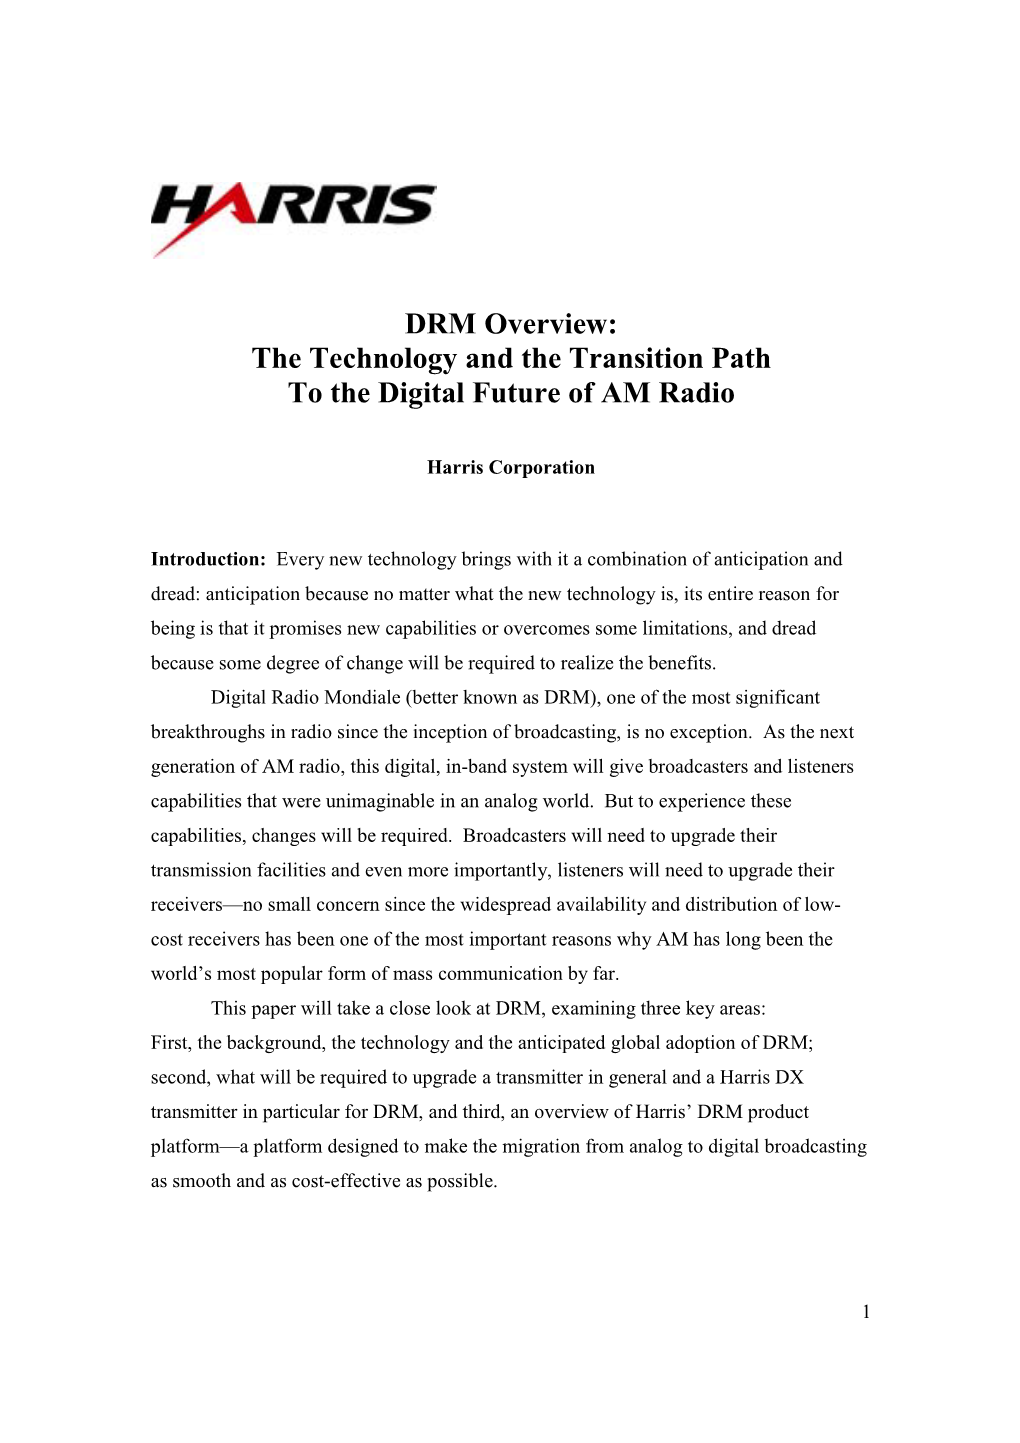 DRM Overview: the Technology and the Transition Path to the Digital Future of AM Radio